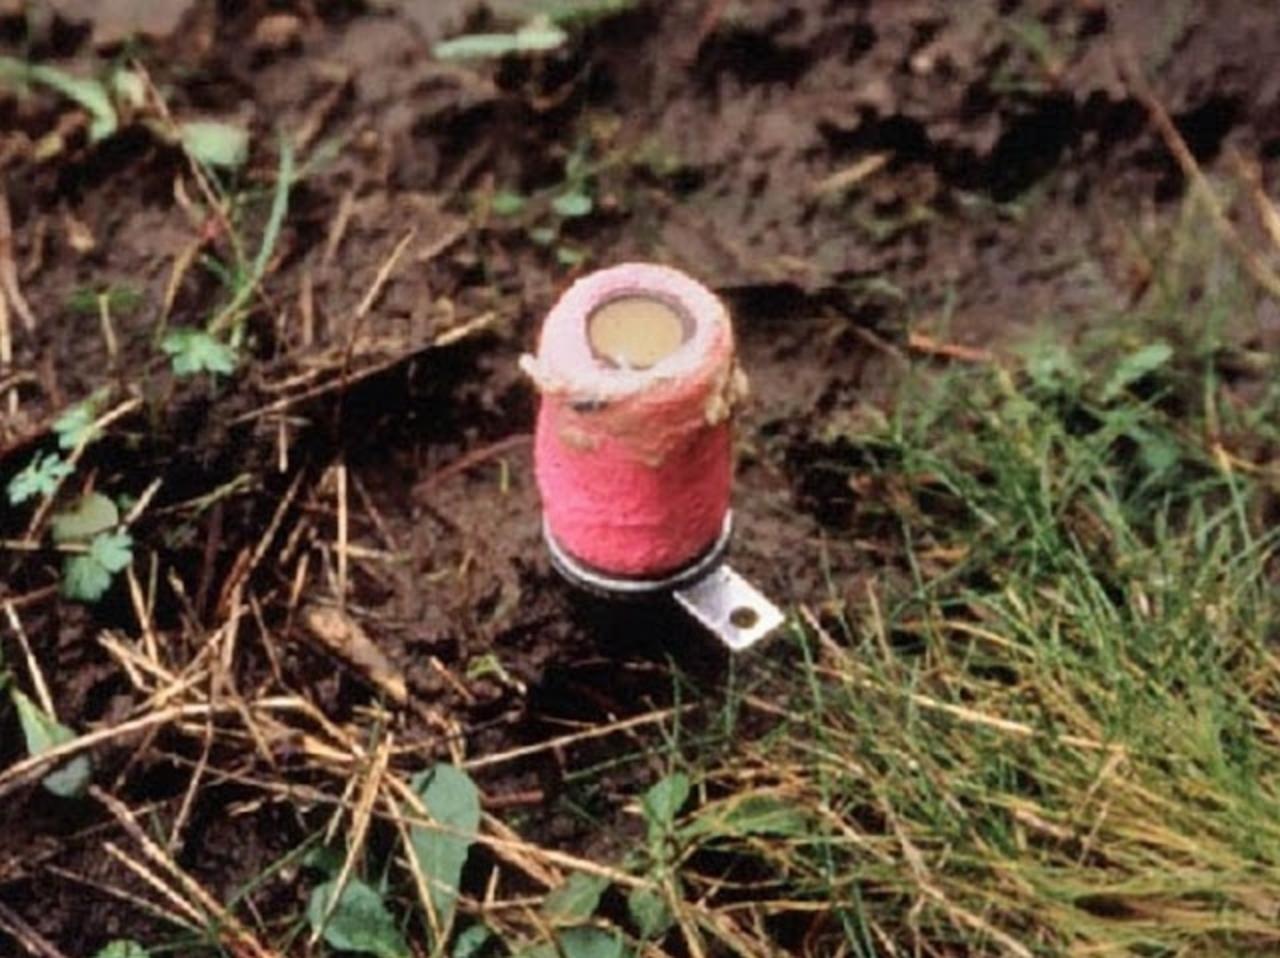 While appearing innocuous and designed to indulge the curiosity of an animal, M-44 "cyanide bombs" have been used by the federal government's Wildlife Services to pre-emptively kill predators on public land that may pose a threat to private domestic livestock.  Photo courtesy Predator Defense